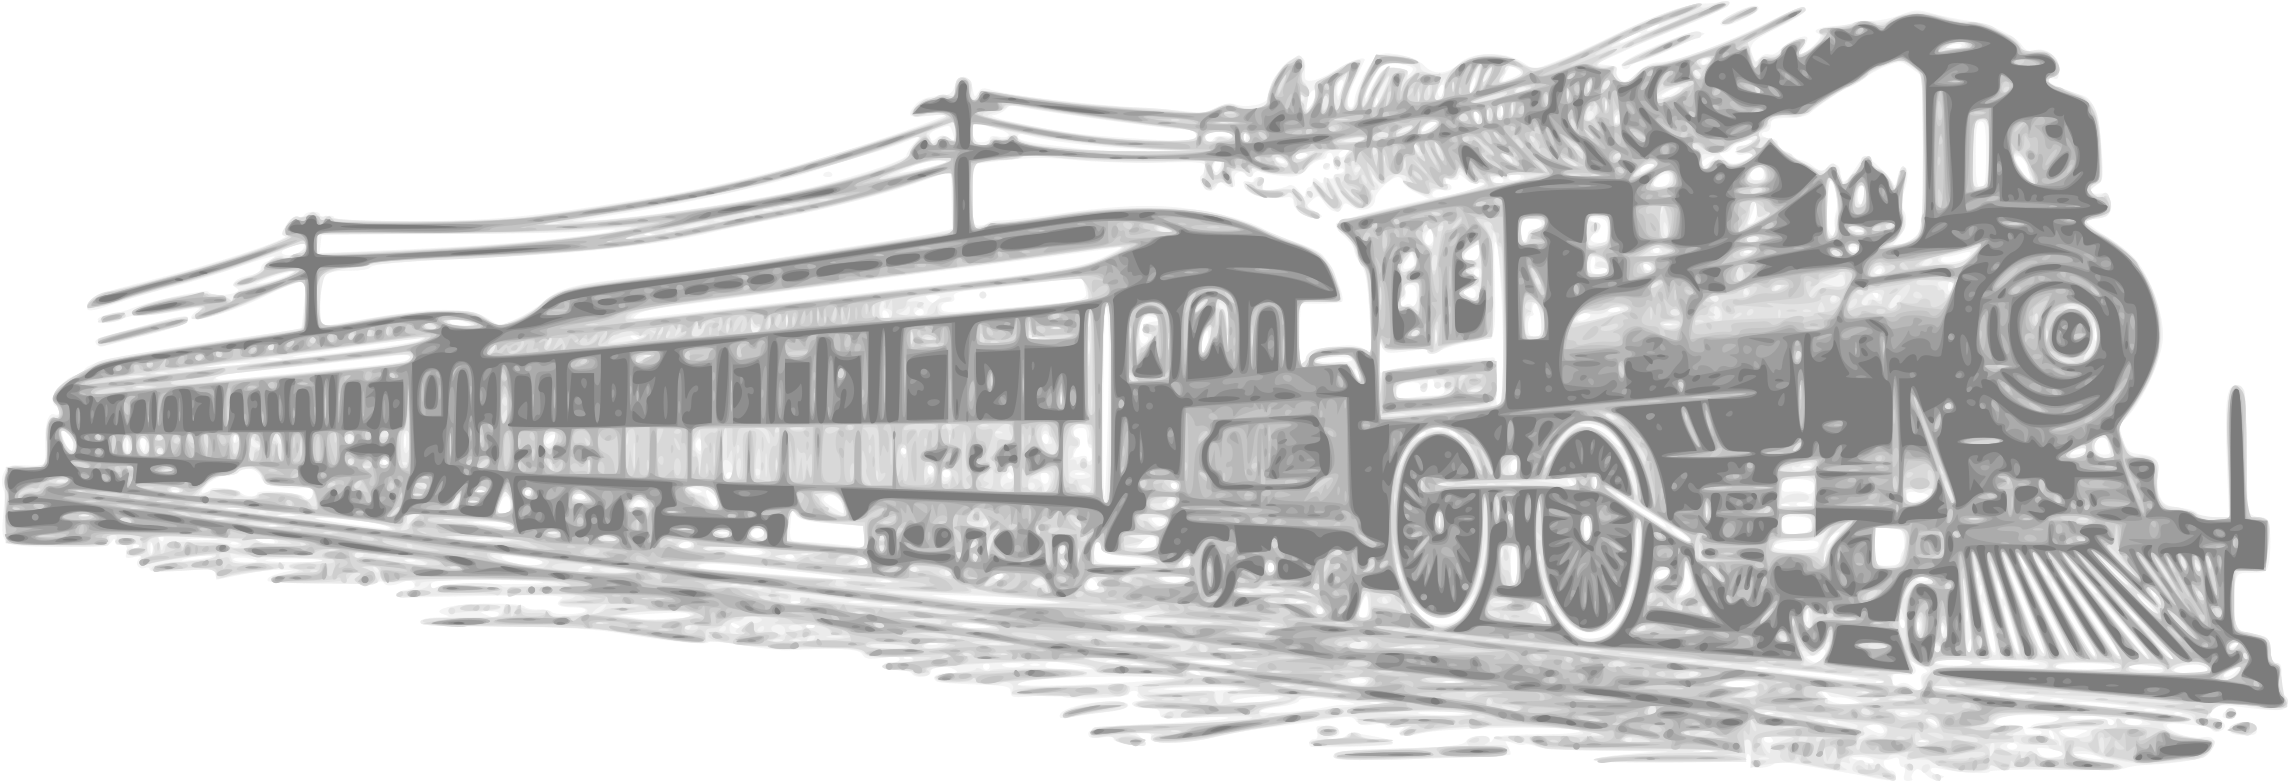 School Bus Border Black And White Download - Steam Trains Clipart (2400x880)